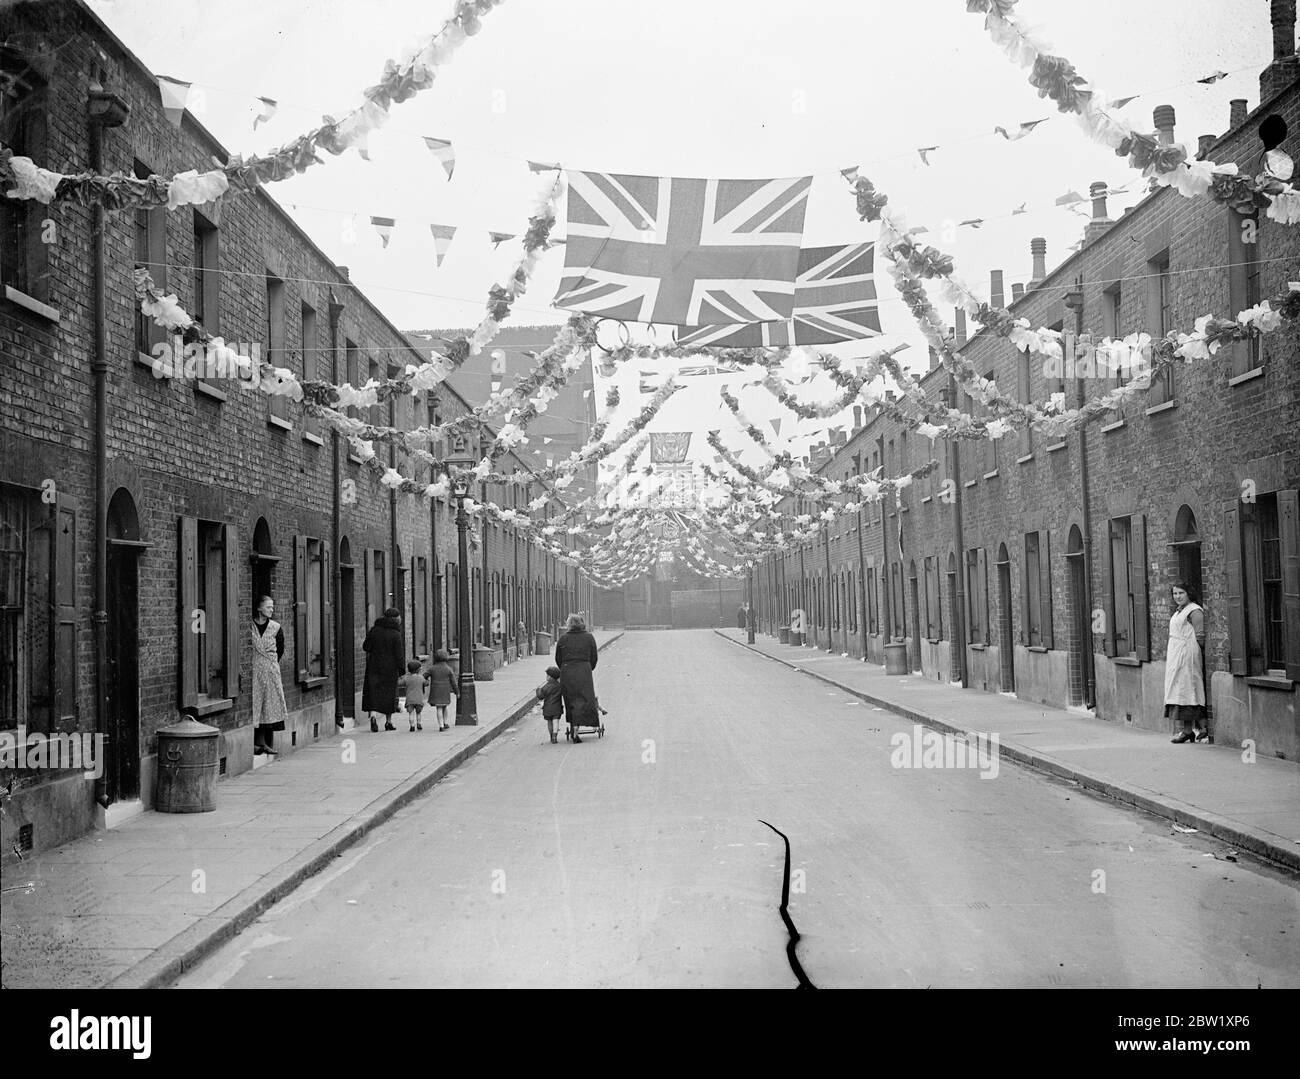 East End surpasses itself for Coronation. Gathering funds by door-to-door collections, many of the poorest streets in the East End of London have rivalled the West End with the brilliance and variety of their decorations for the Coronation. Photo shows: Bunting and flags slung from house to house from the Coronation decoration scheme of Appleby Street, Shoreditch. 7 May 1937 Stock Photo